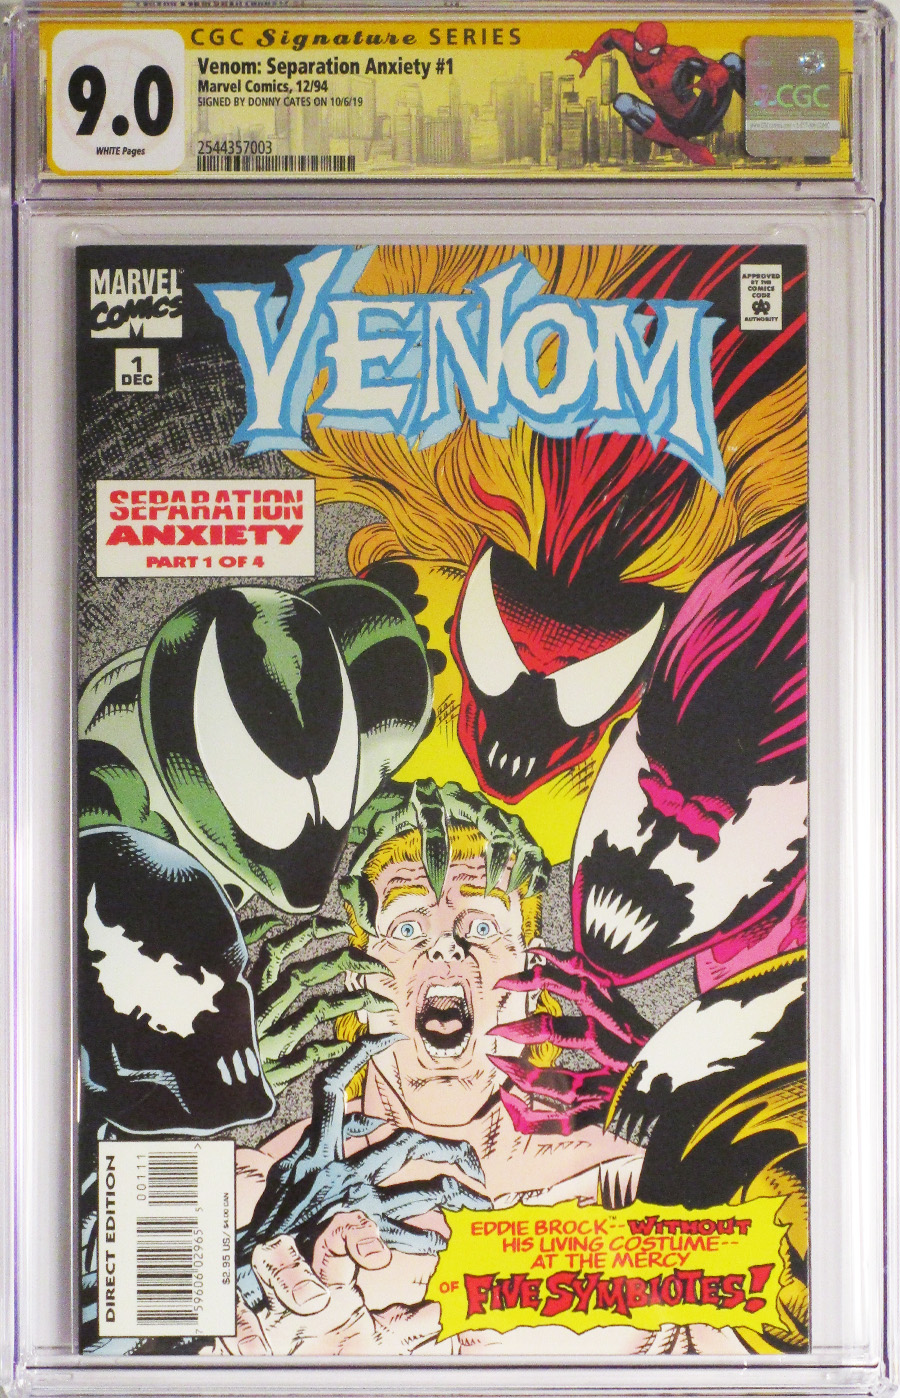 Venom Separation Anxiety #1 Cover B CGC Signature Series 9.0 Signed by Donnie Cates